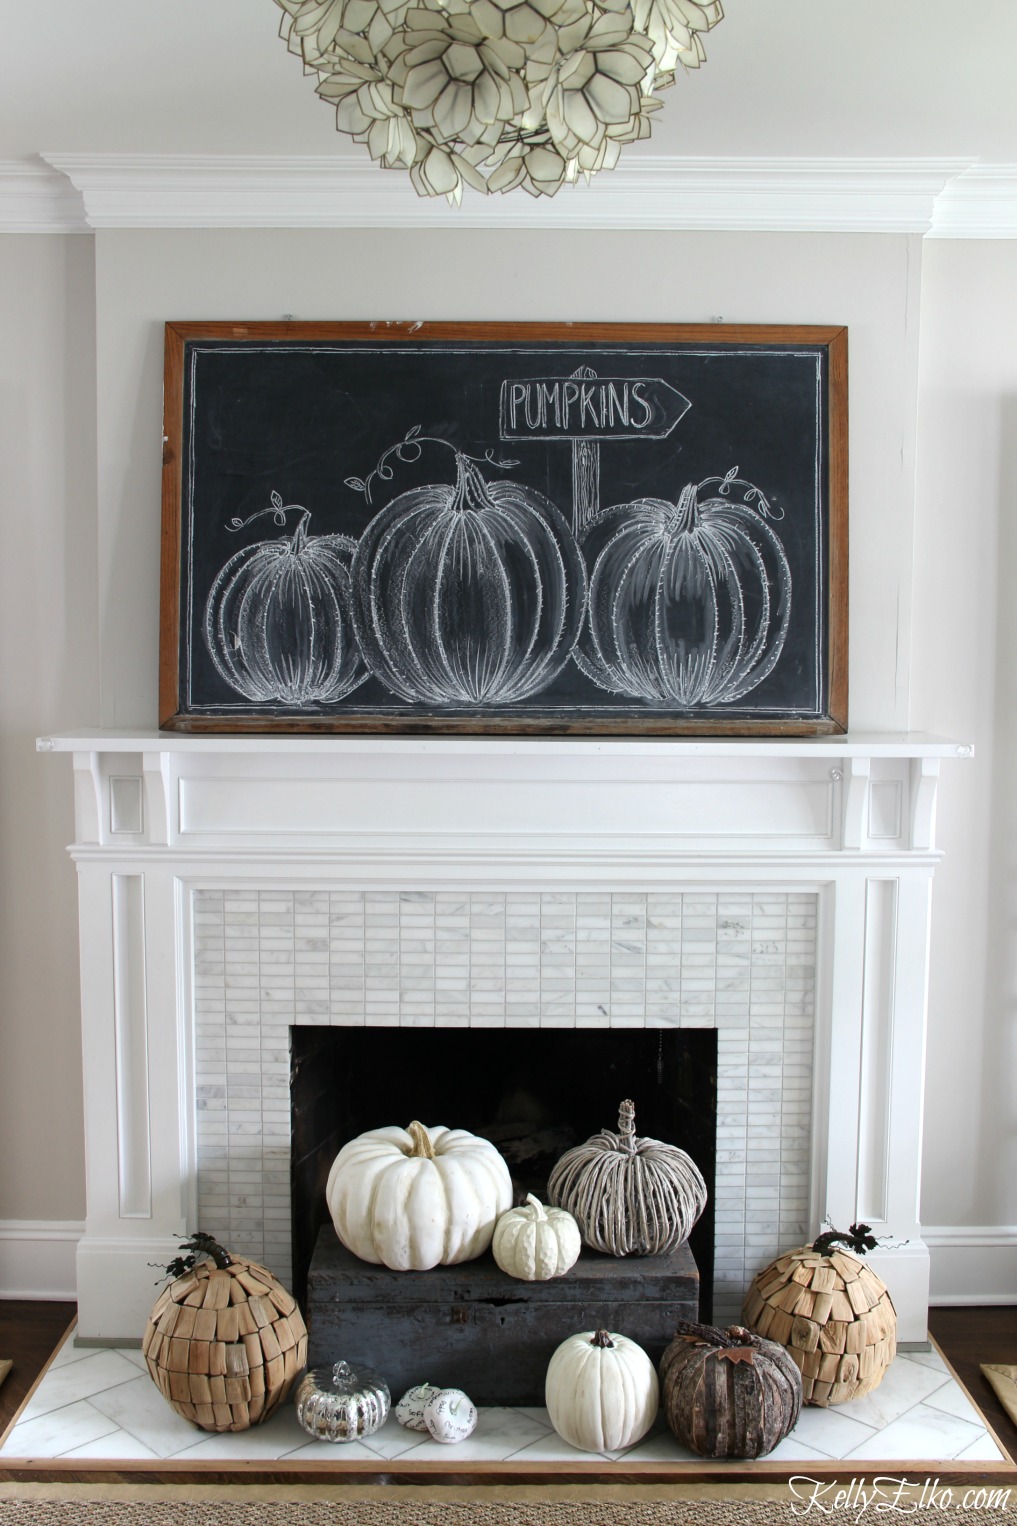 Love this chalkboard pumpkin mantel for fall and lots of pumpkins on the hearth kellyelko.com #fall #falldecor #chalkboard #chalkart #chalkboardart #pumpkins #pumpkindecor #decorate 